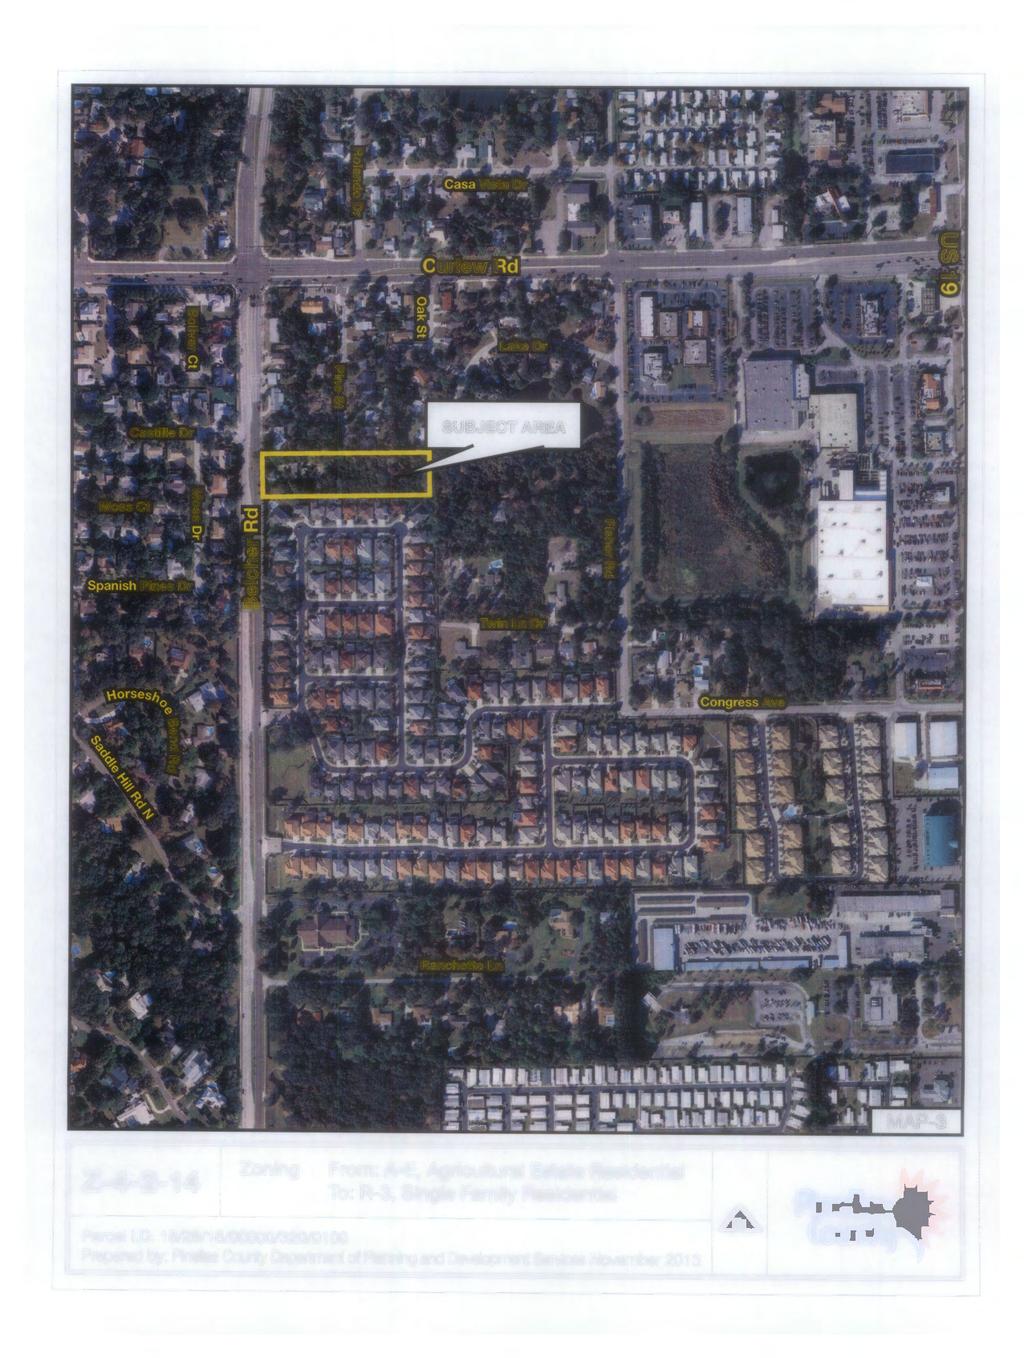 Zoning From: A-E, Agricultural Estate